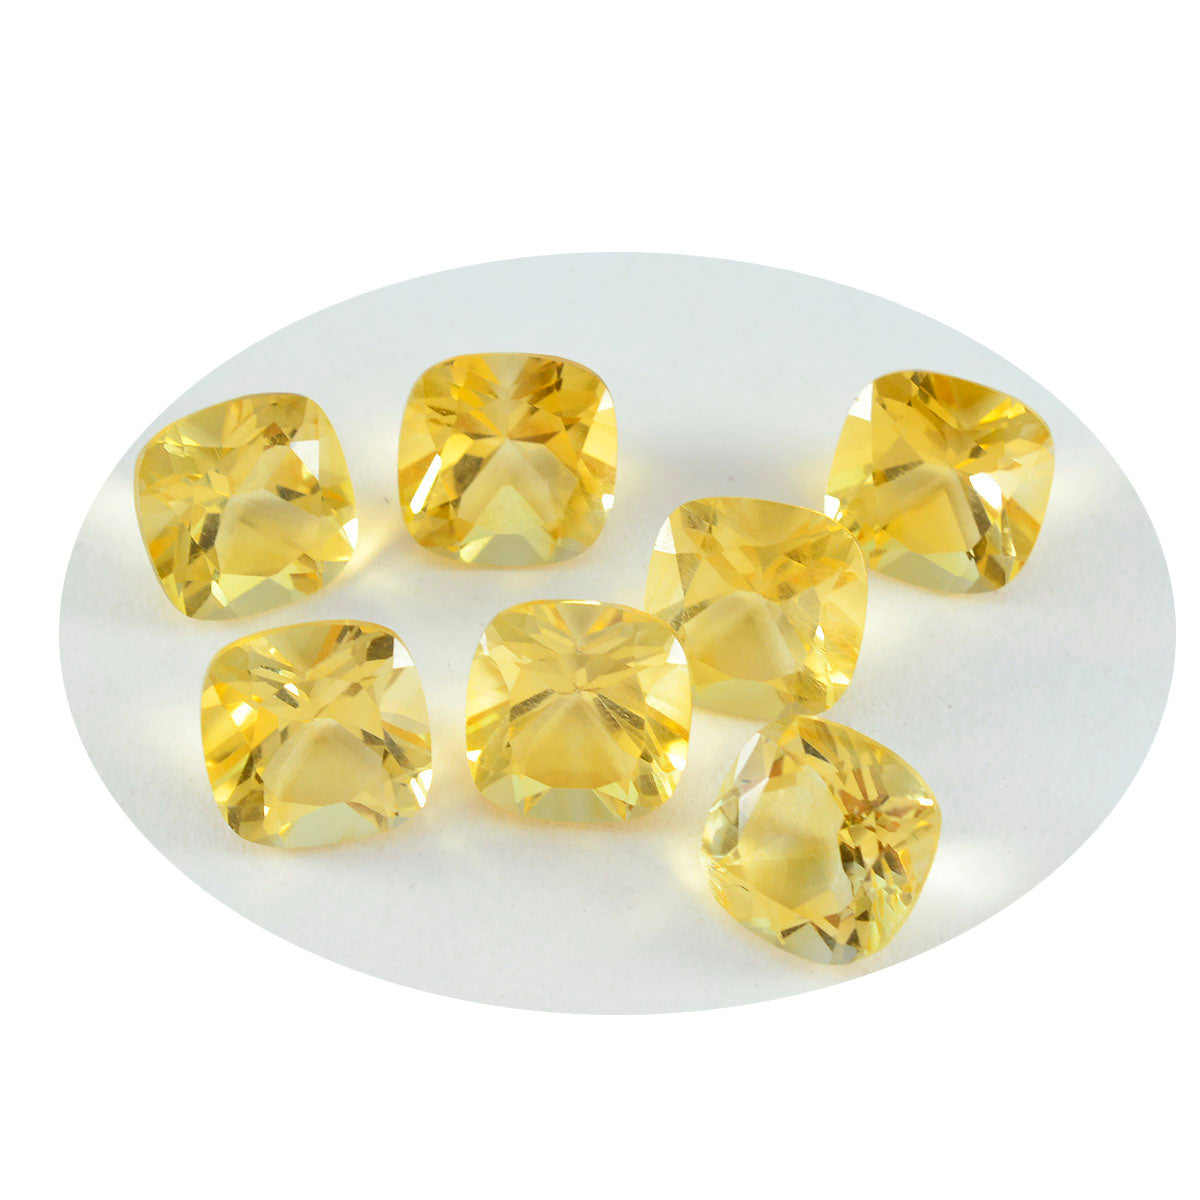 Riyogems 1PC Real Yellow Citrine Faceted 6x6 mm Cushion Shape AAA Quality Stone